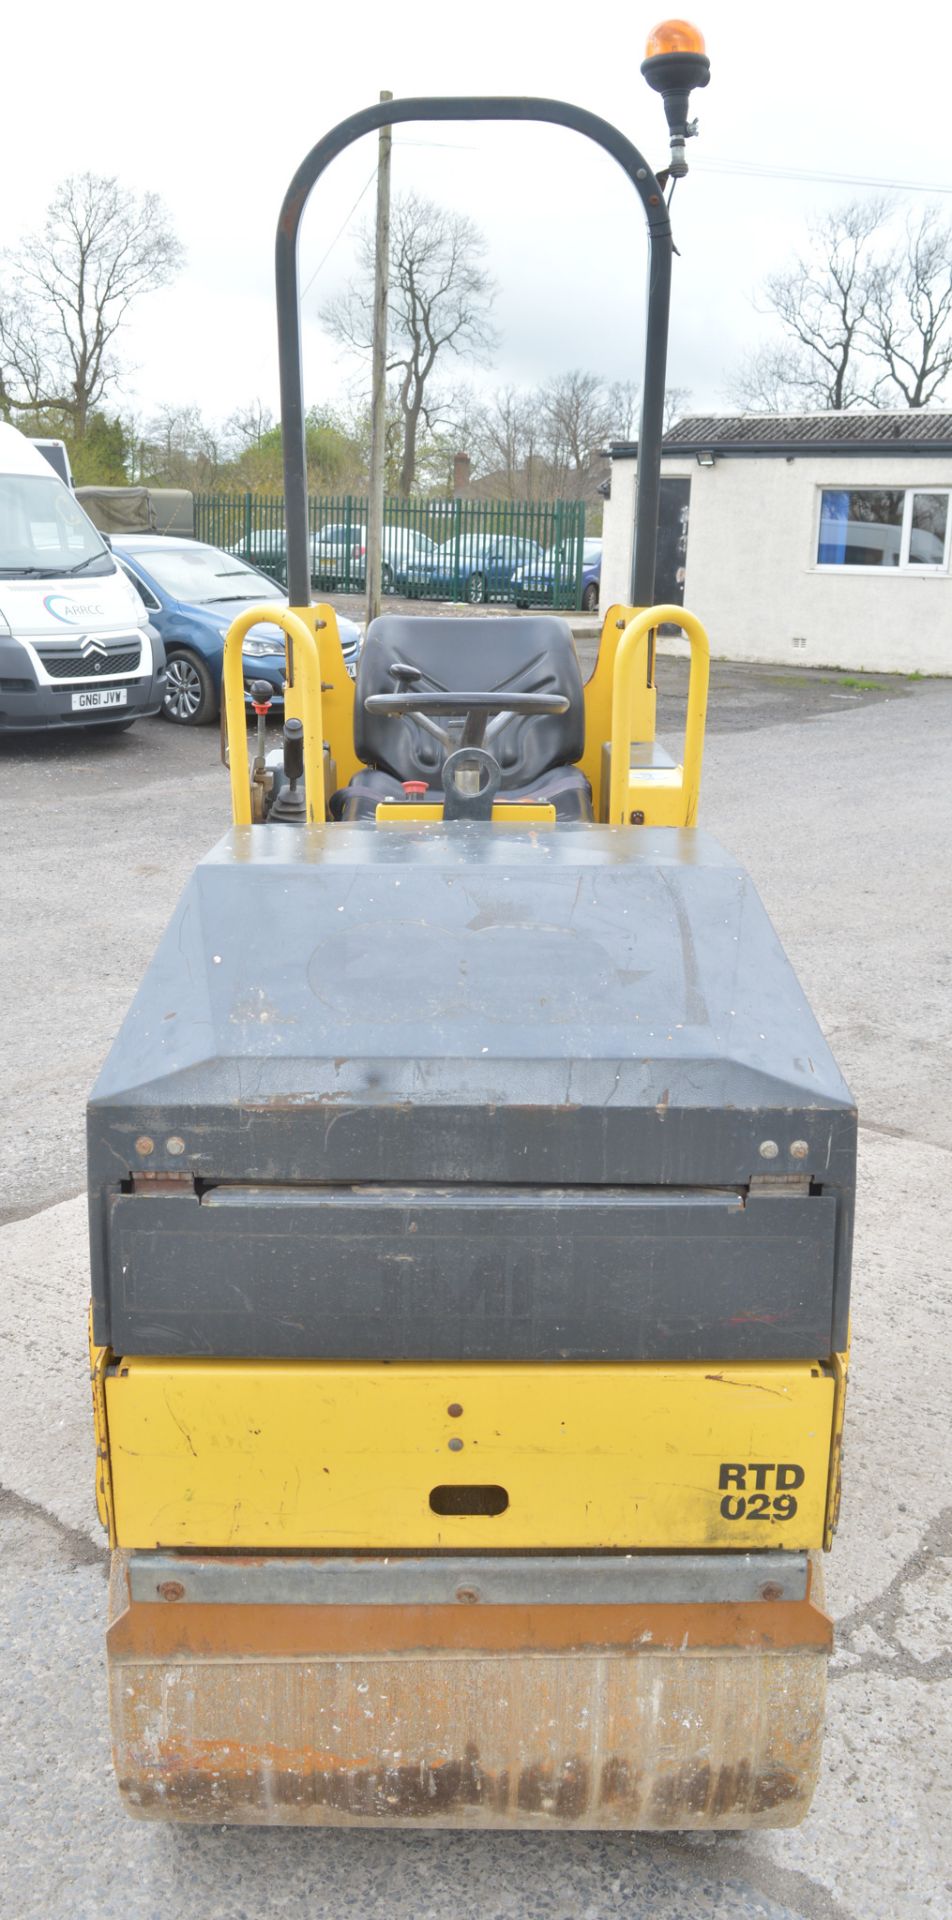 Bomag BW80AD-2 double drum ride on roller  Year: 2006 S/N: 426052 Recorded hours: 869 RTD029 - Image 3 of 7